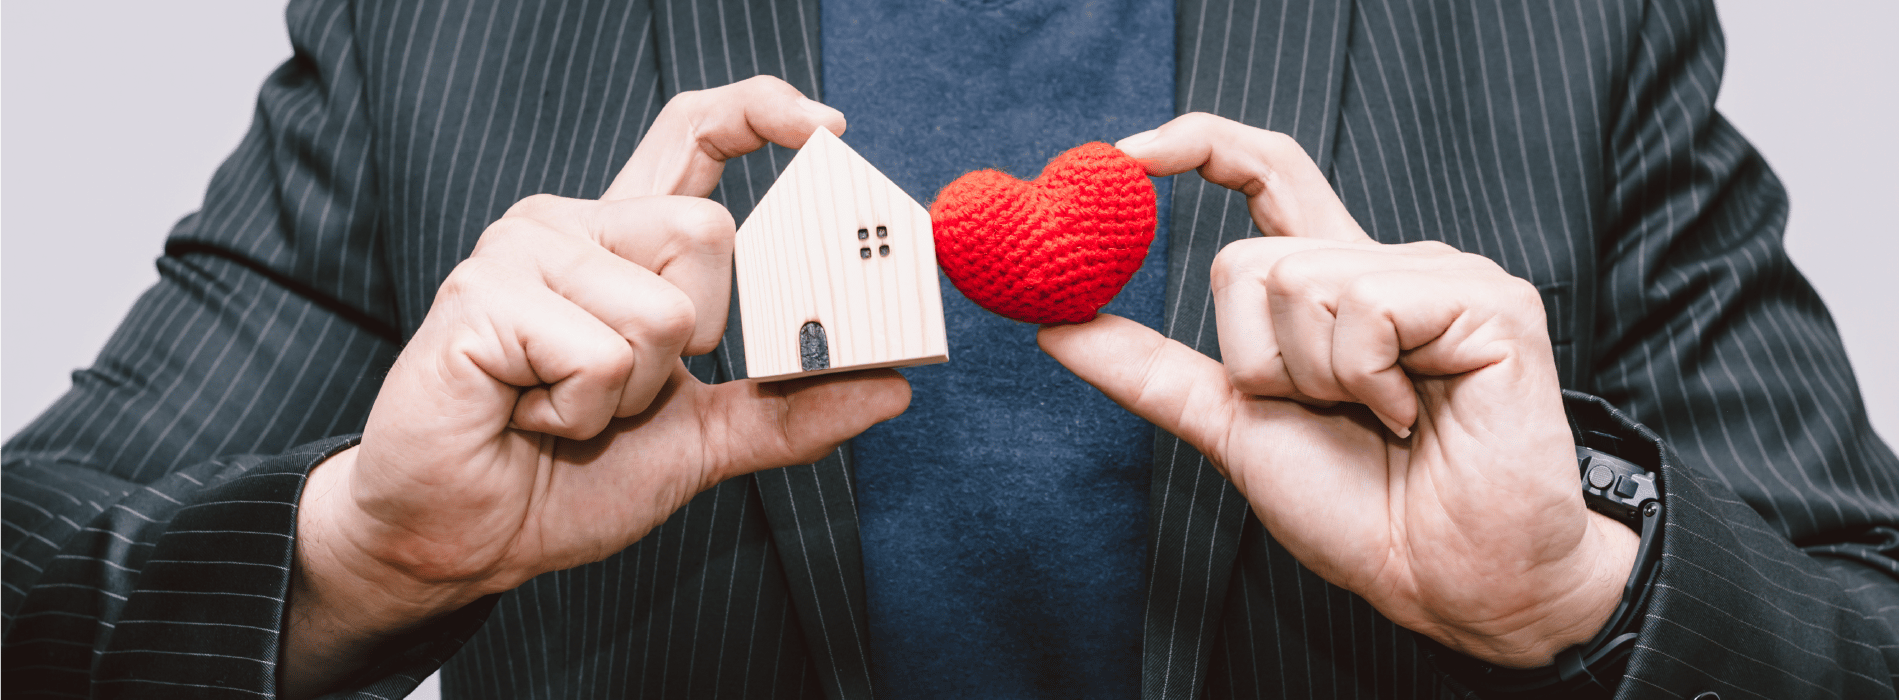 close up of a man holding a wooden house figure and heart figure in both hands